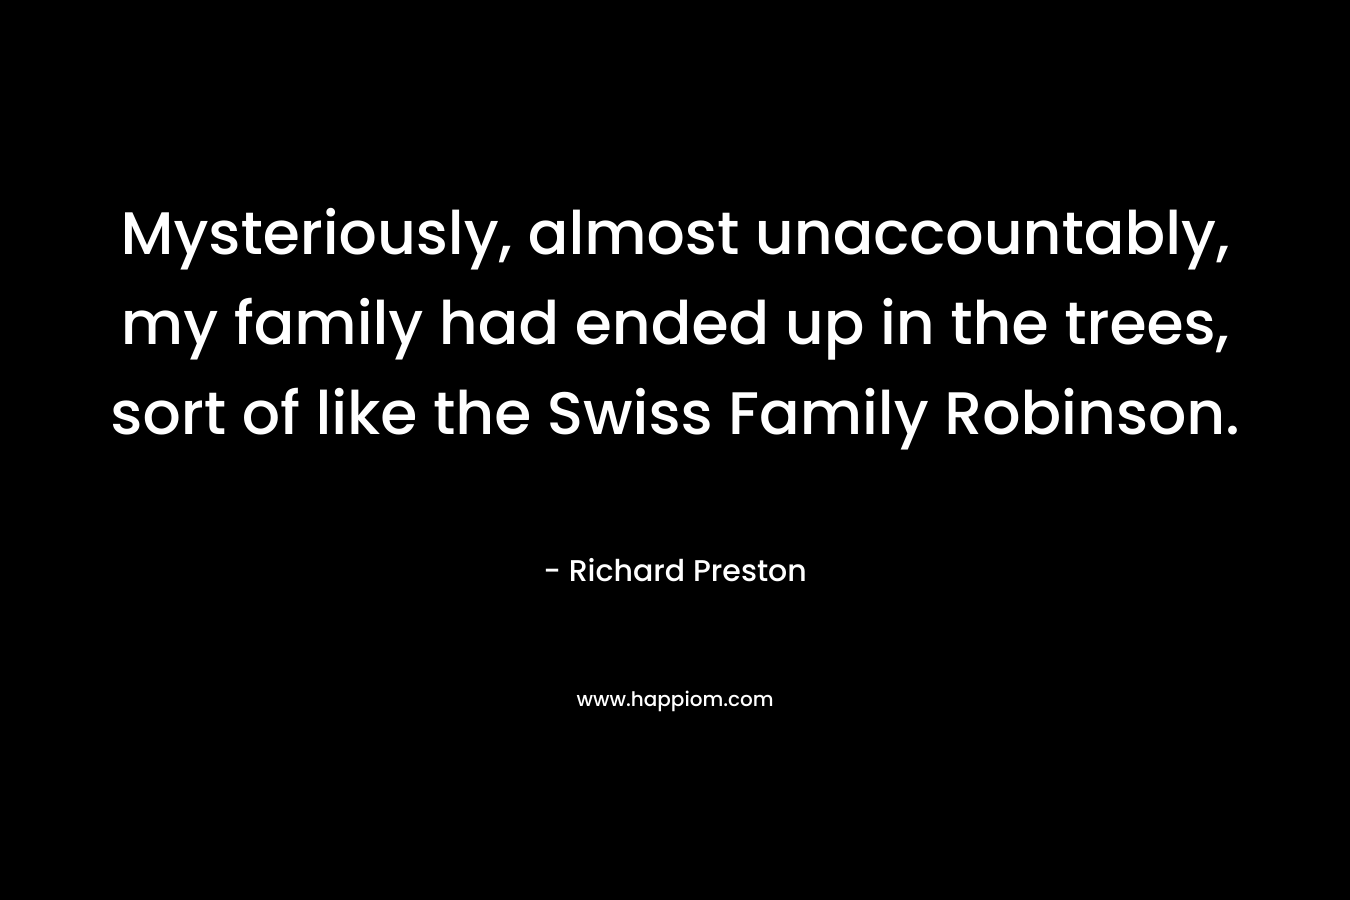 Mysteriously, almost unaccountably, my family had ended up in the trees, sort of like the Swiss Family Robinson.